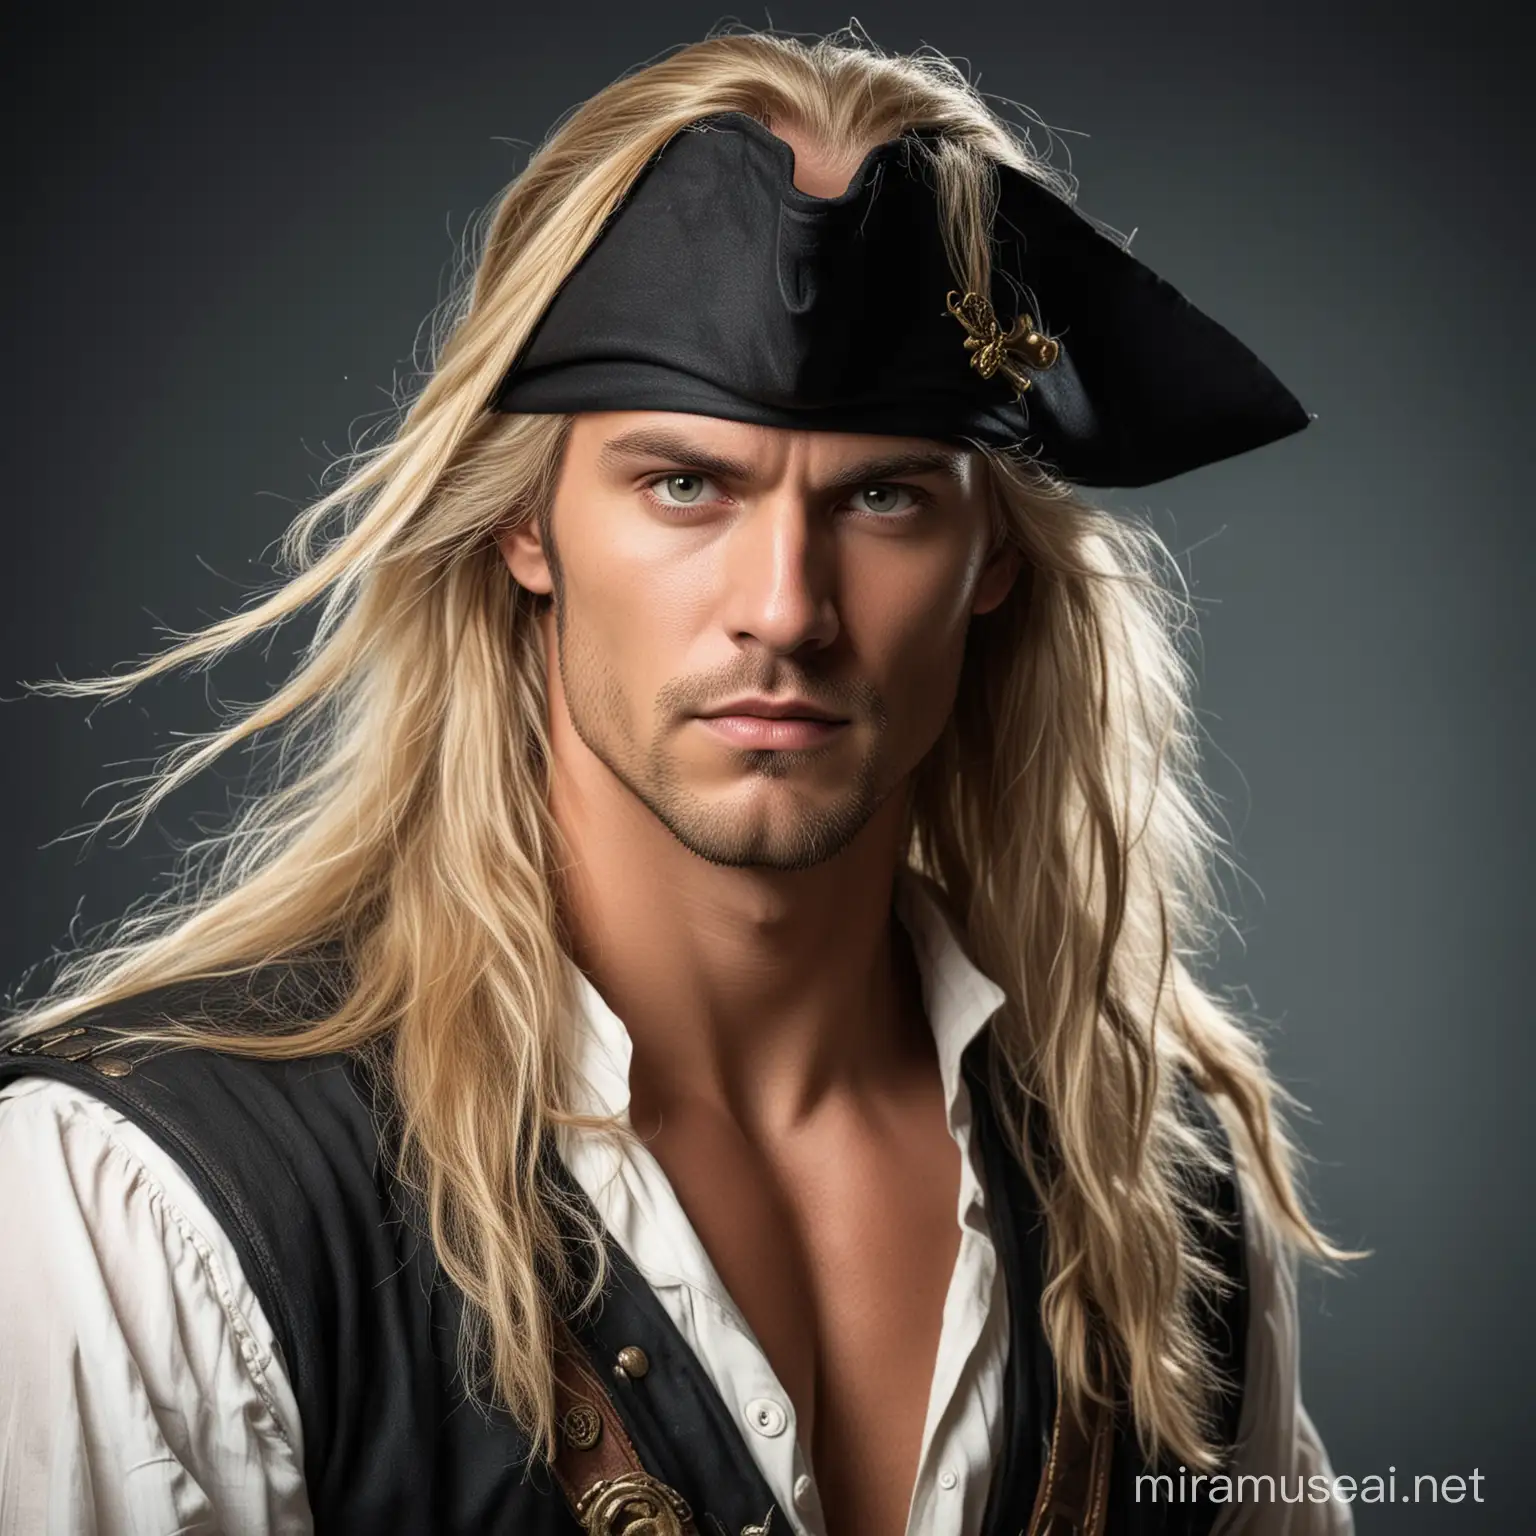 Serious Muscular LongHaired Blonde Male Pirate Portrait